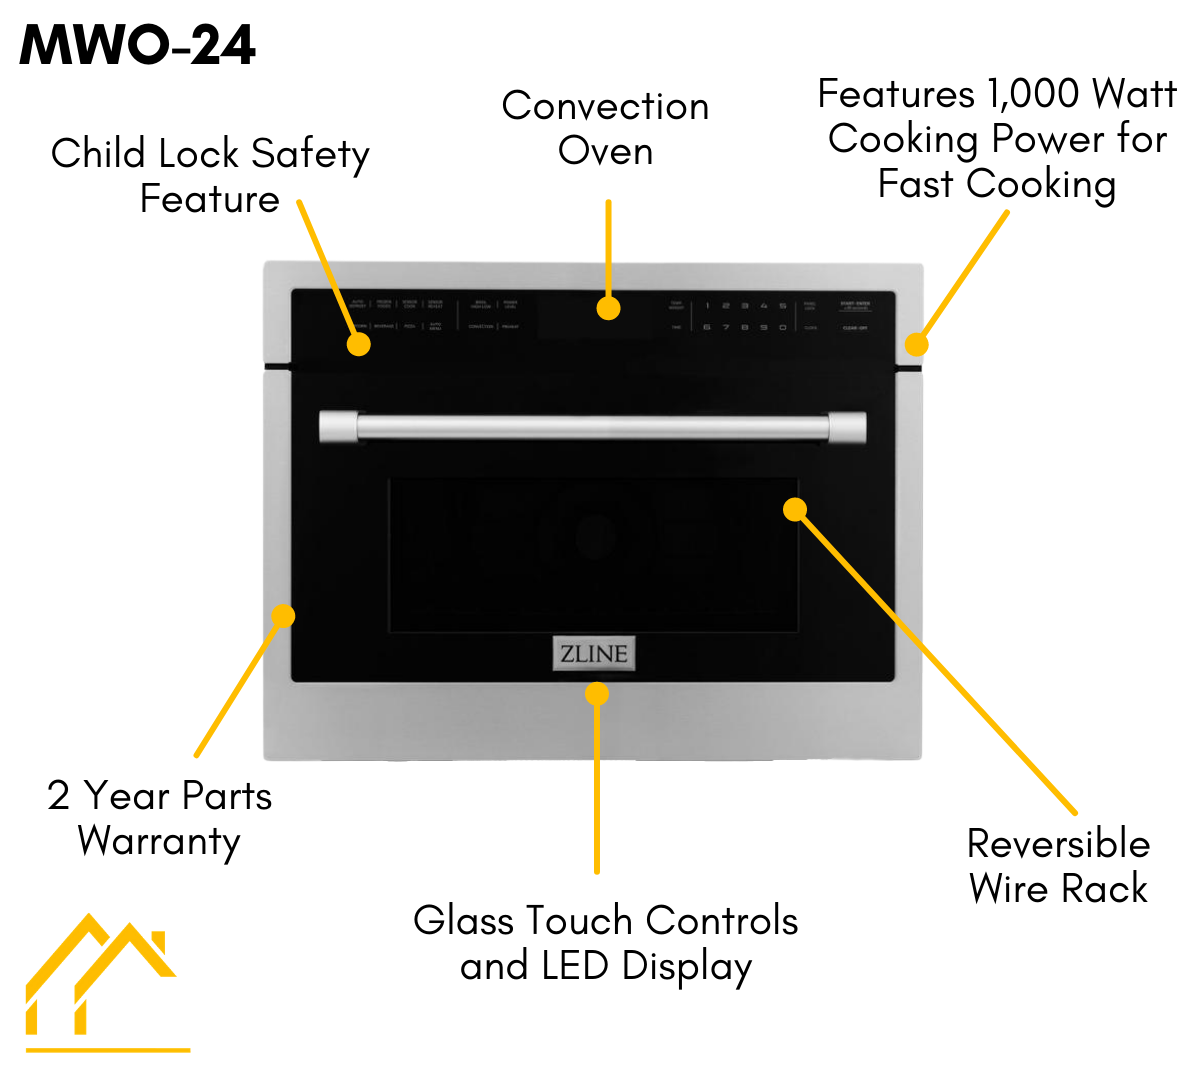 ZLINE Stainless Steel 24" Built-in Convection Microwave Oven and 30" Single Wall Oven with Self Clean